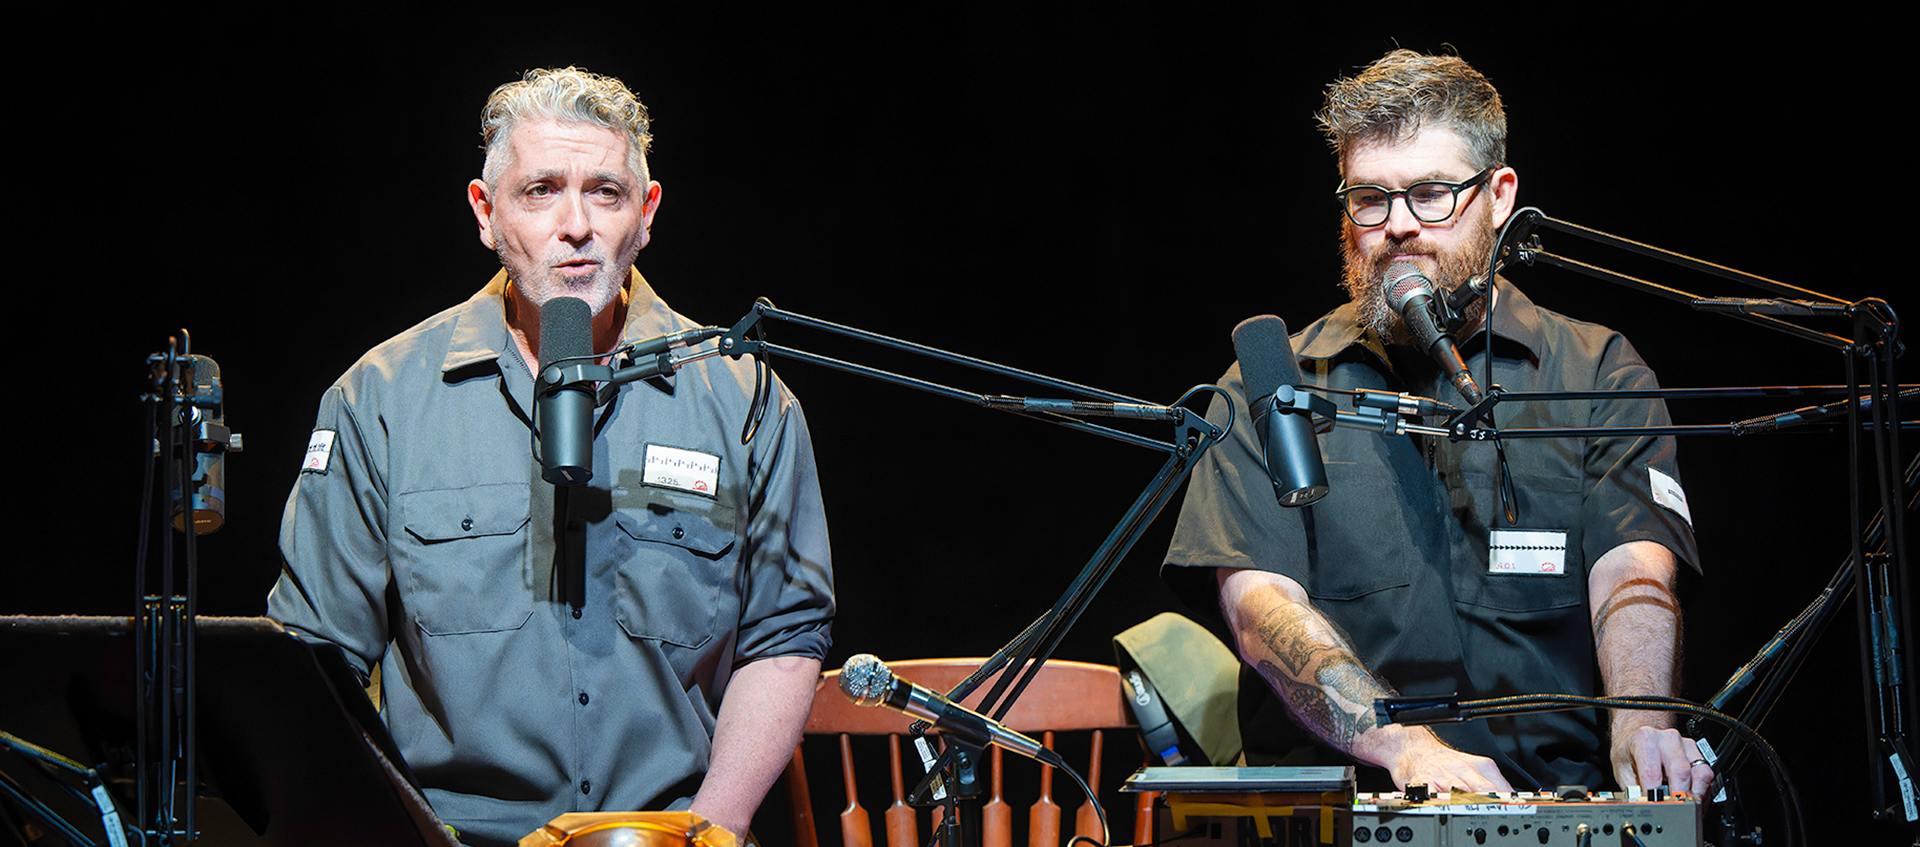 Ain Gordon and Josh Quillen performing Relics. The men are seated at a desk in front of microphones.